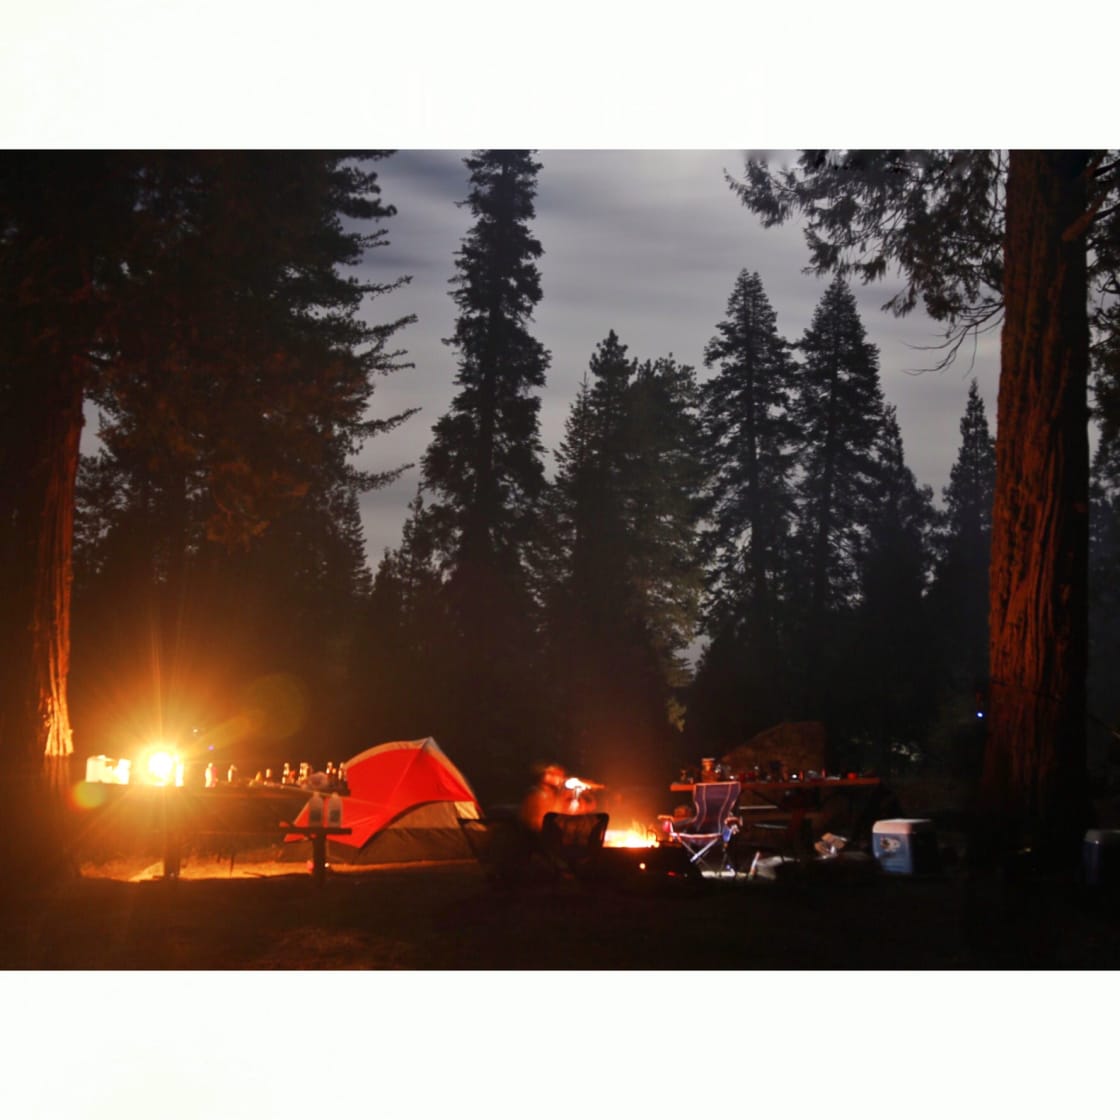 Night moves at the campground